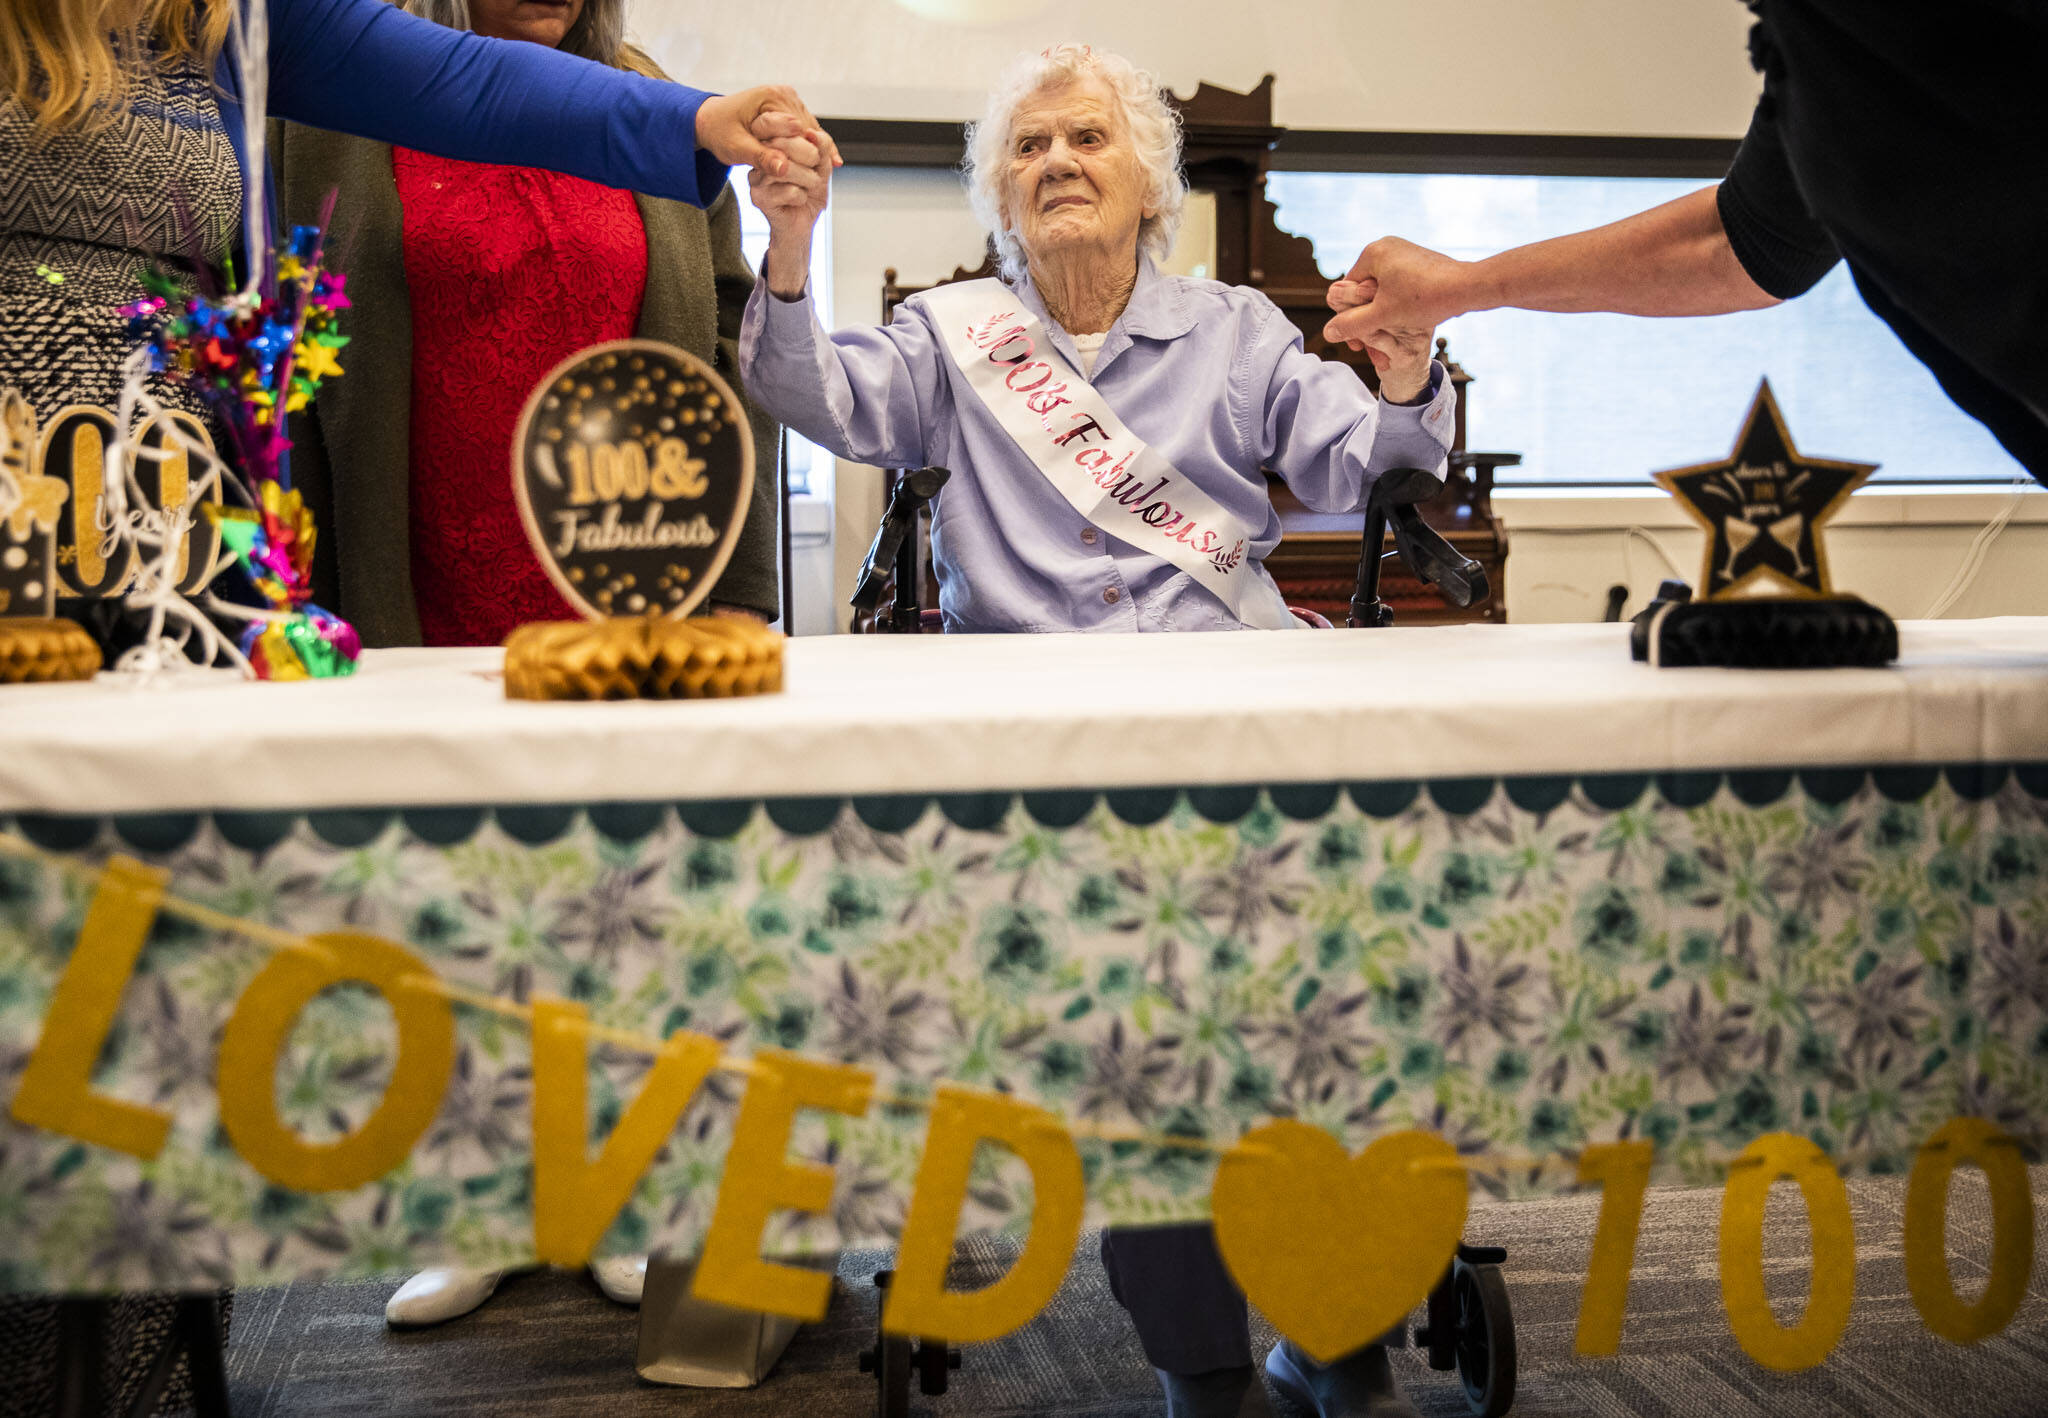 From her seat of honor, Ferne Ullestad holds family members’ hands during her 100th birthday celebration April 30. (Olivia Vanni / The Herald)